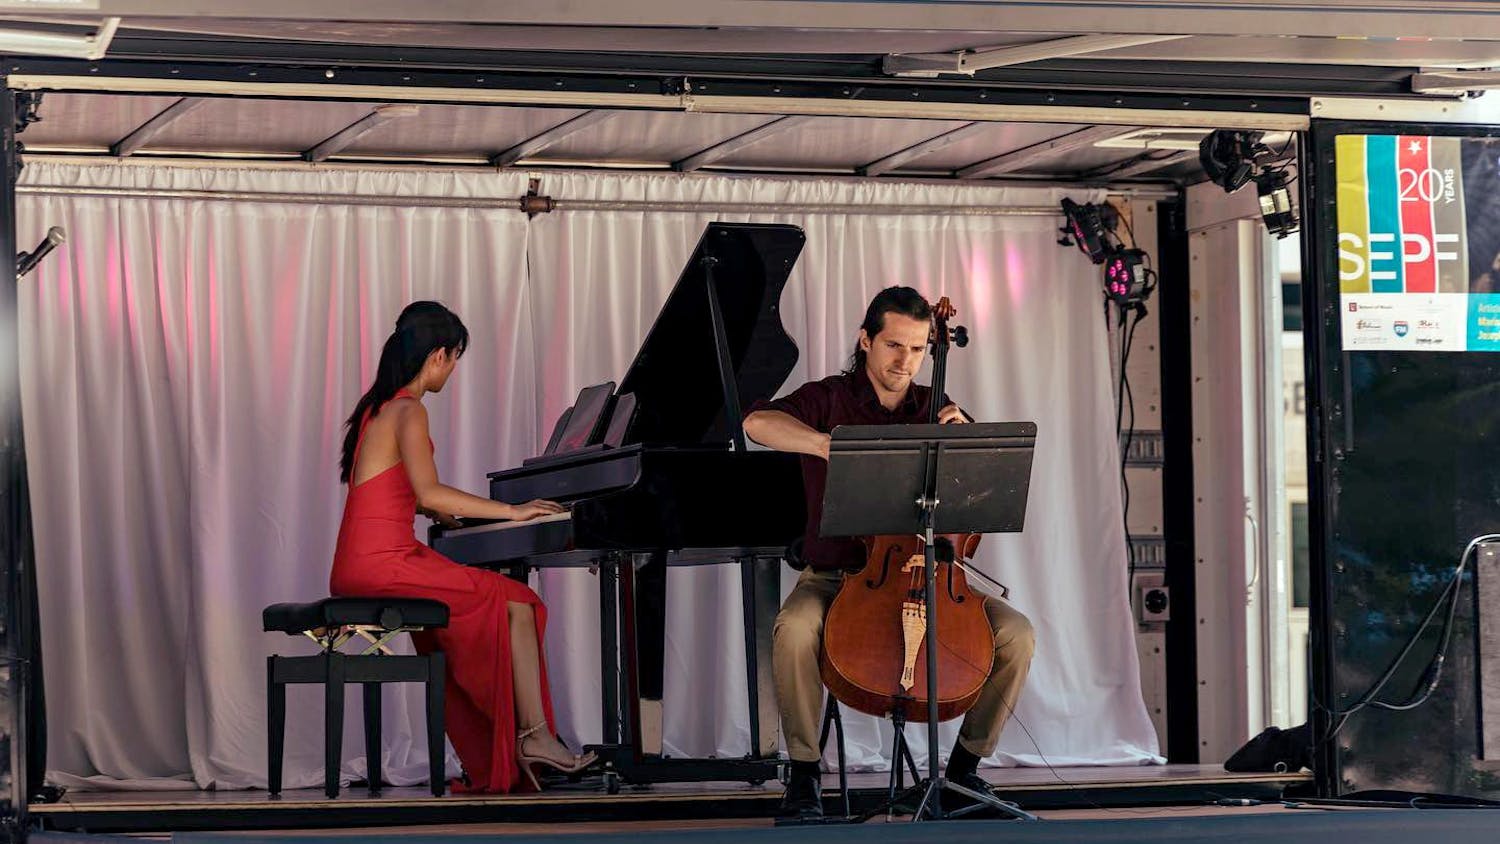 Susan Zhang and Nick Luby perform on the Concert Truck during the Southeastern Piano Festival. Zhang and Luby co-founded the Concert Truck in 2016, converting a 16-foot box truck into a portable stage.&nbsp;